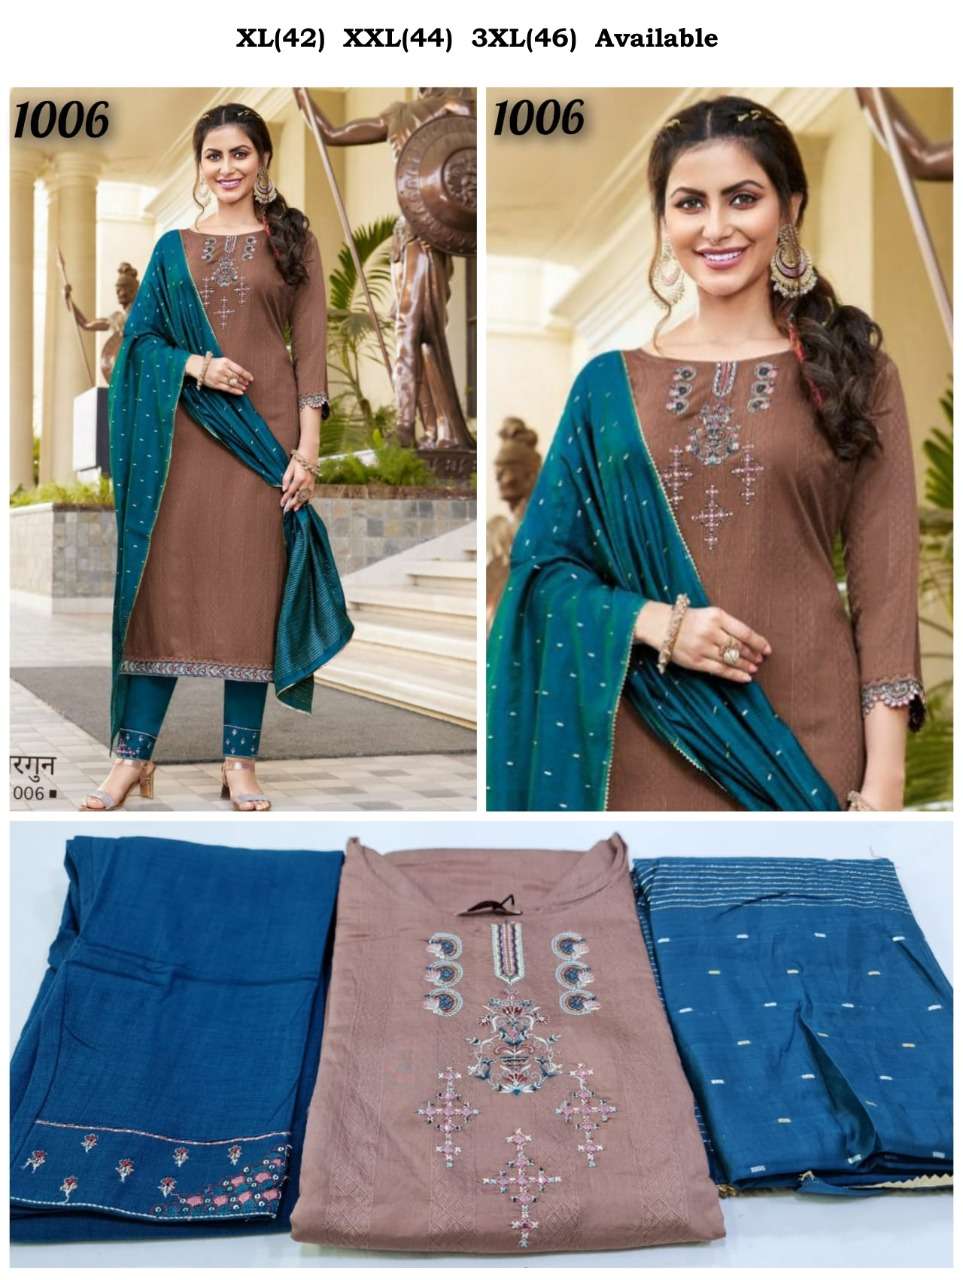 balaji emporium presents sargun 1 dno 1006 beige indian women ready to wear straight pant kurti set traditional ethnic casual office wear collection 3596 2022 11 10 15 10 04